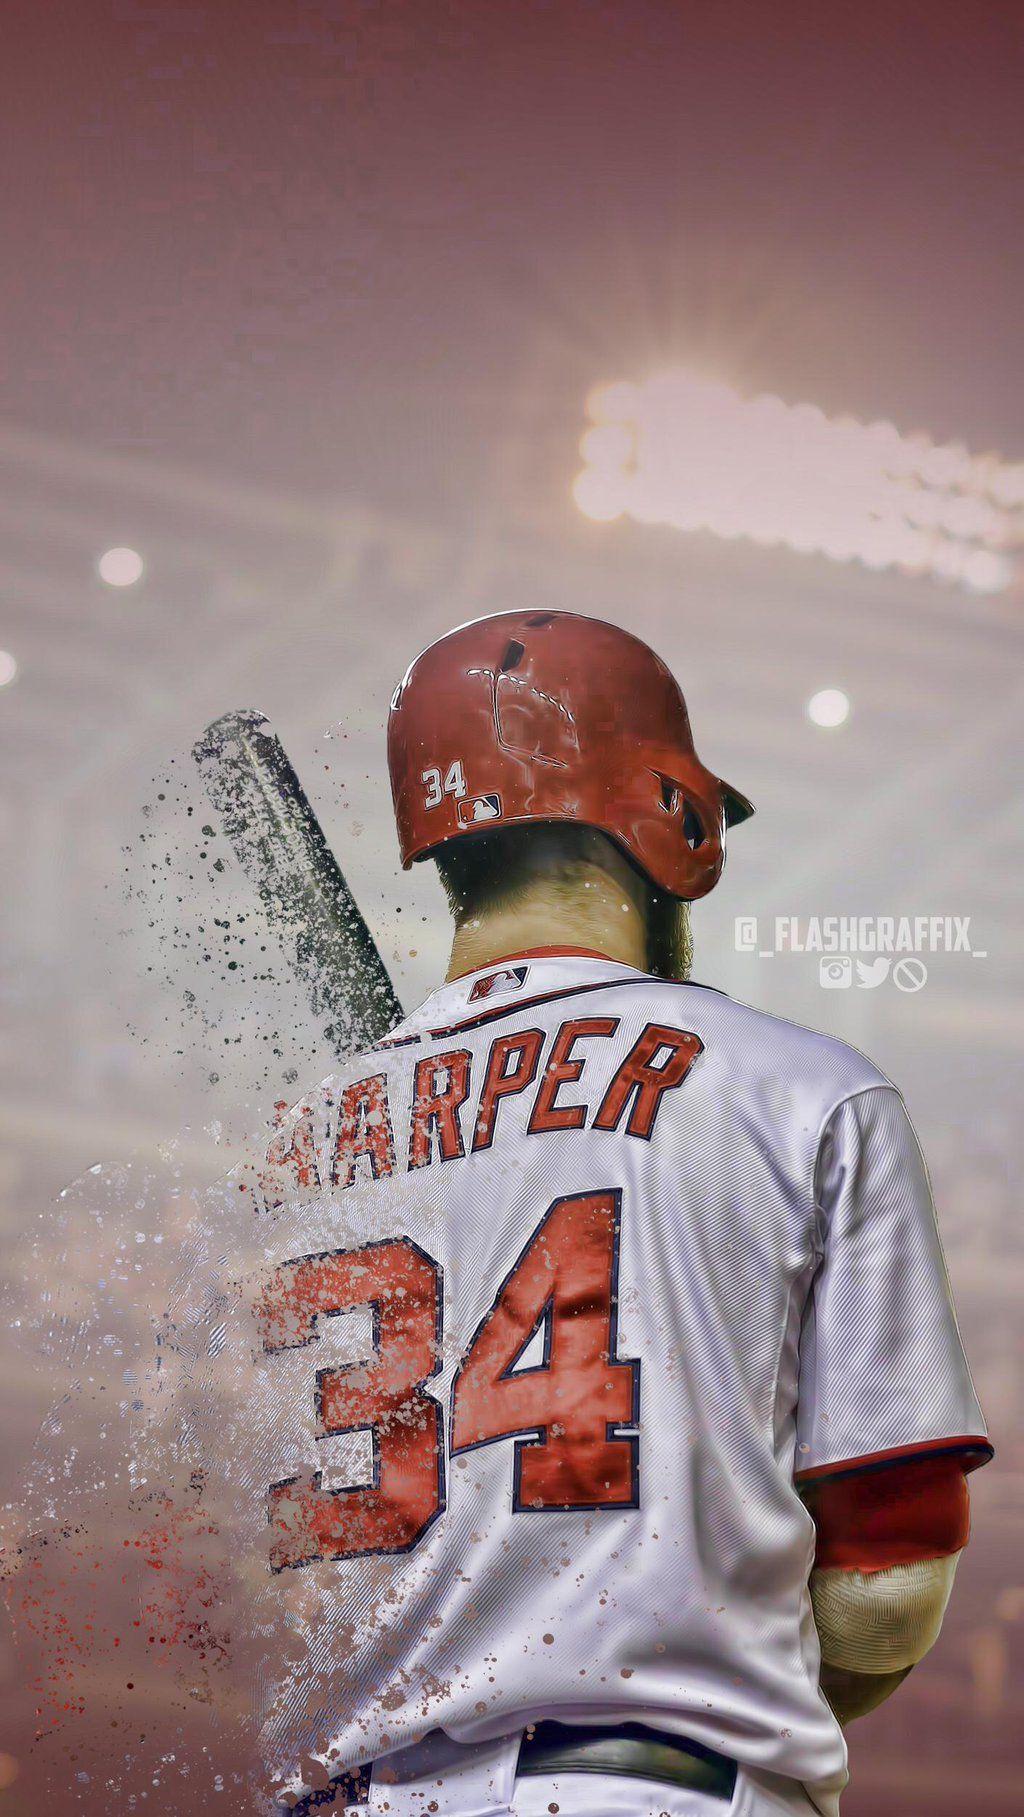 Bryce Harper Wallpapers - Top Free Bryce Harper Backgrounds -  WallpaperAccess